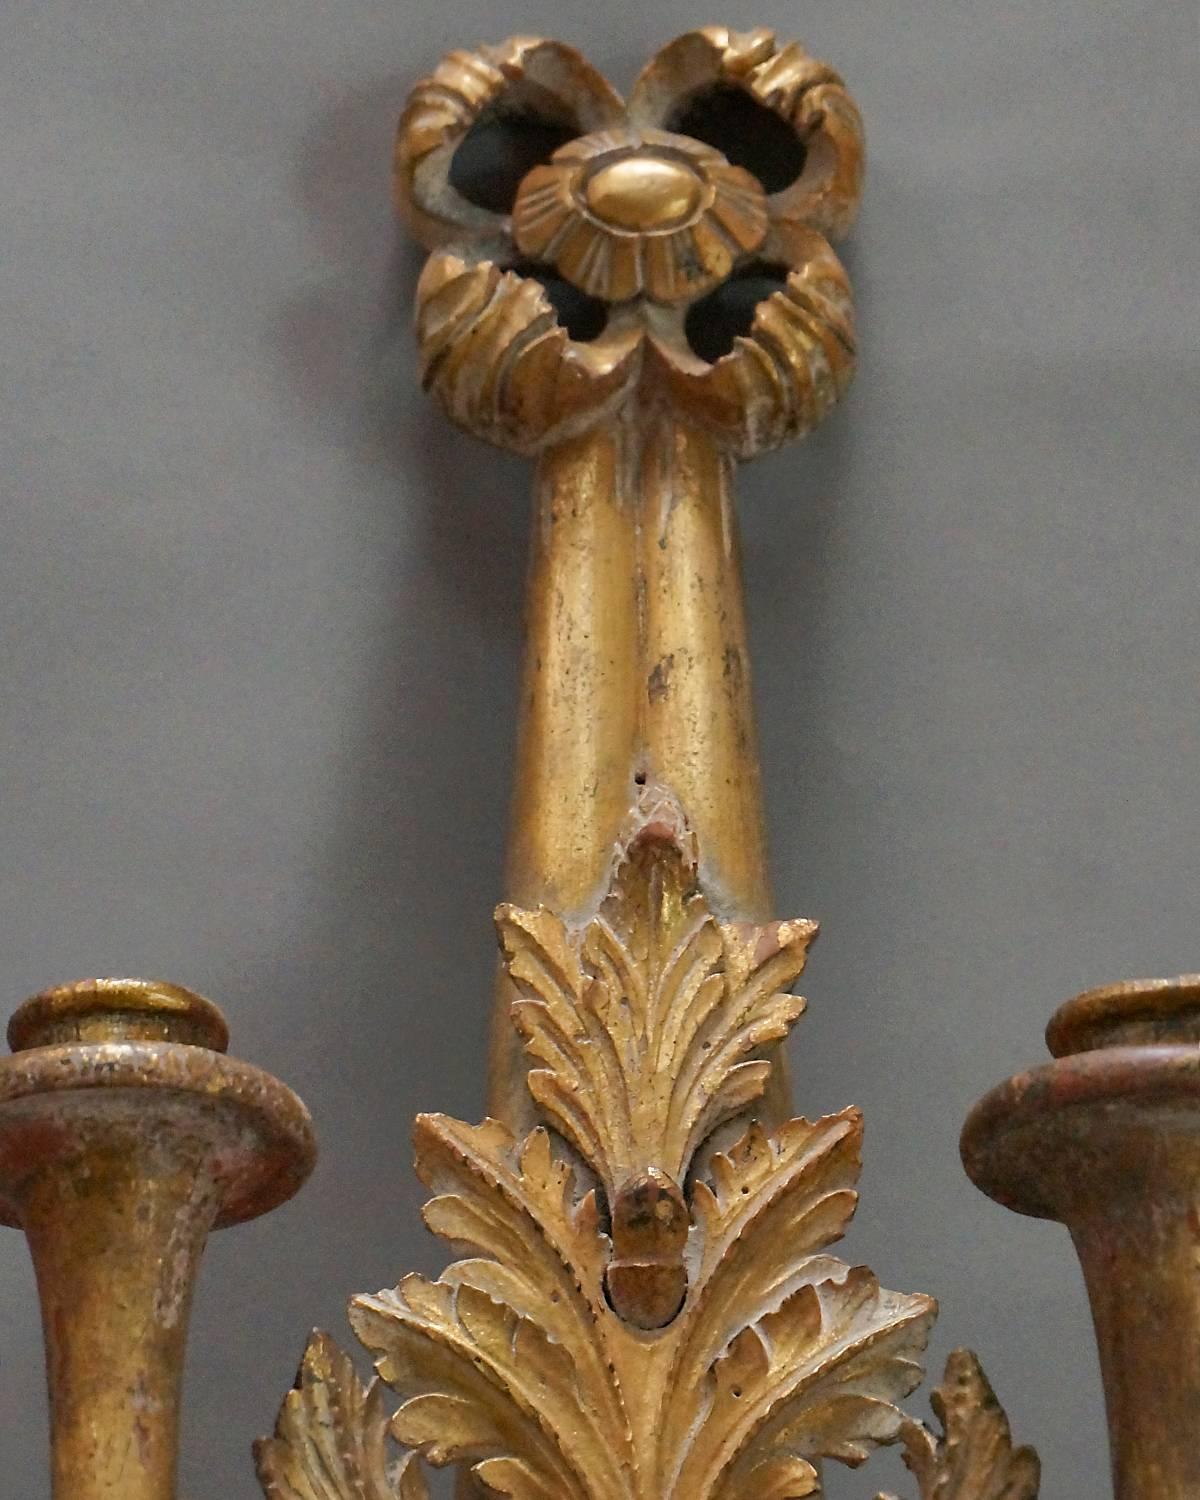 Pair of gilt sconces from the Swedish Empire period, circa 1830. Each piece is carved to represent a tasselled ribbon hung from a floret and tied with a cluster of acanthus leaves. Two trumpet shaped candle holders on each.